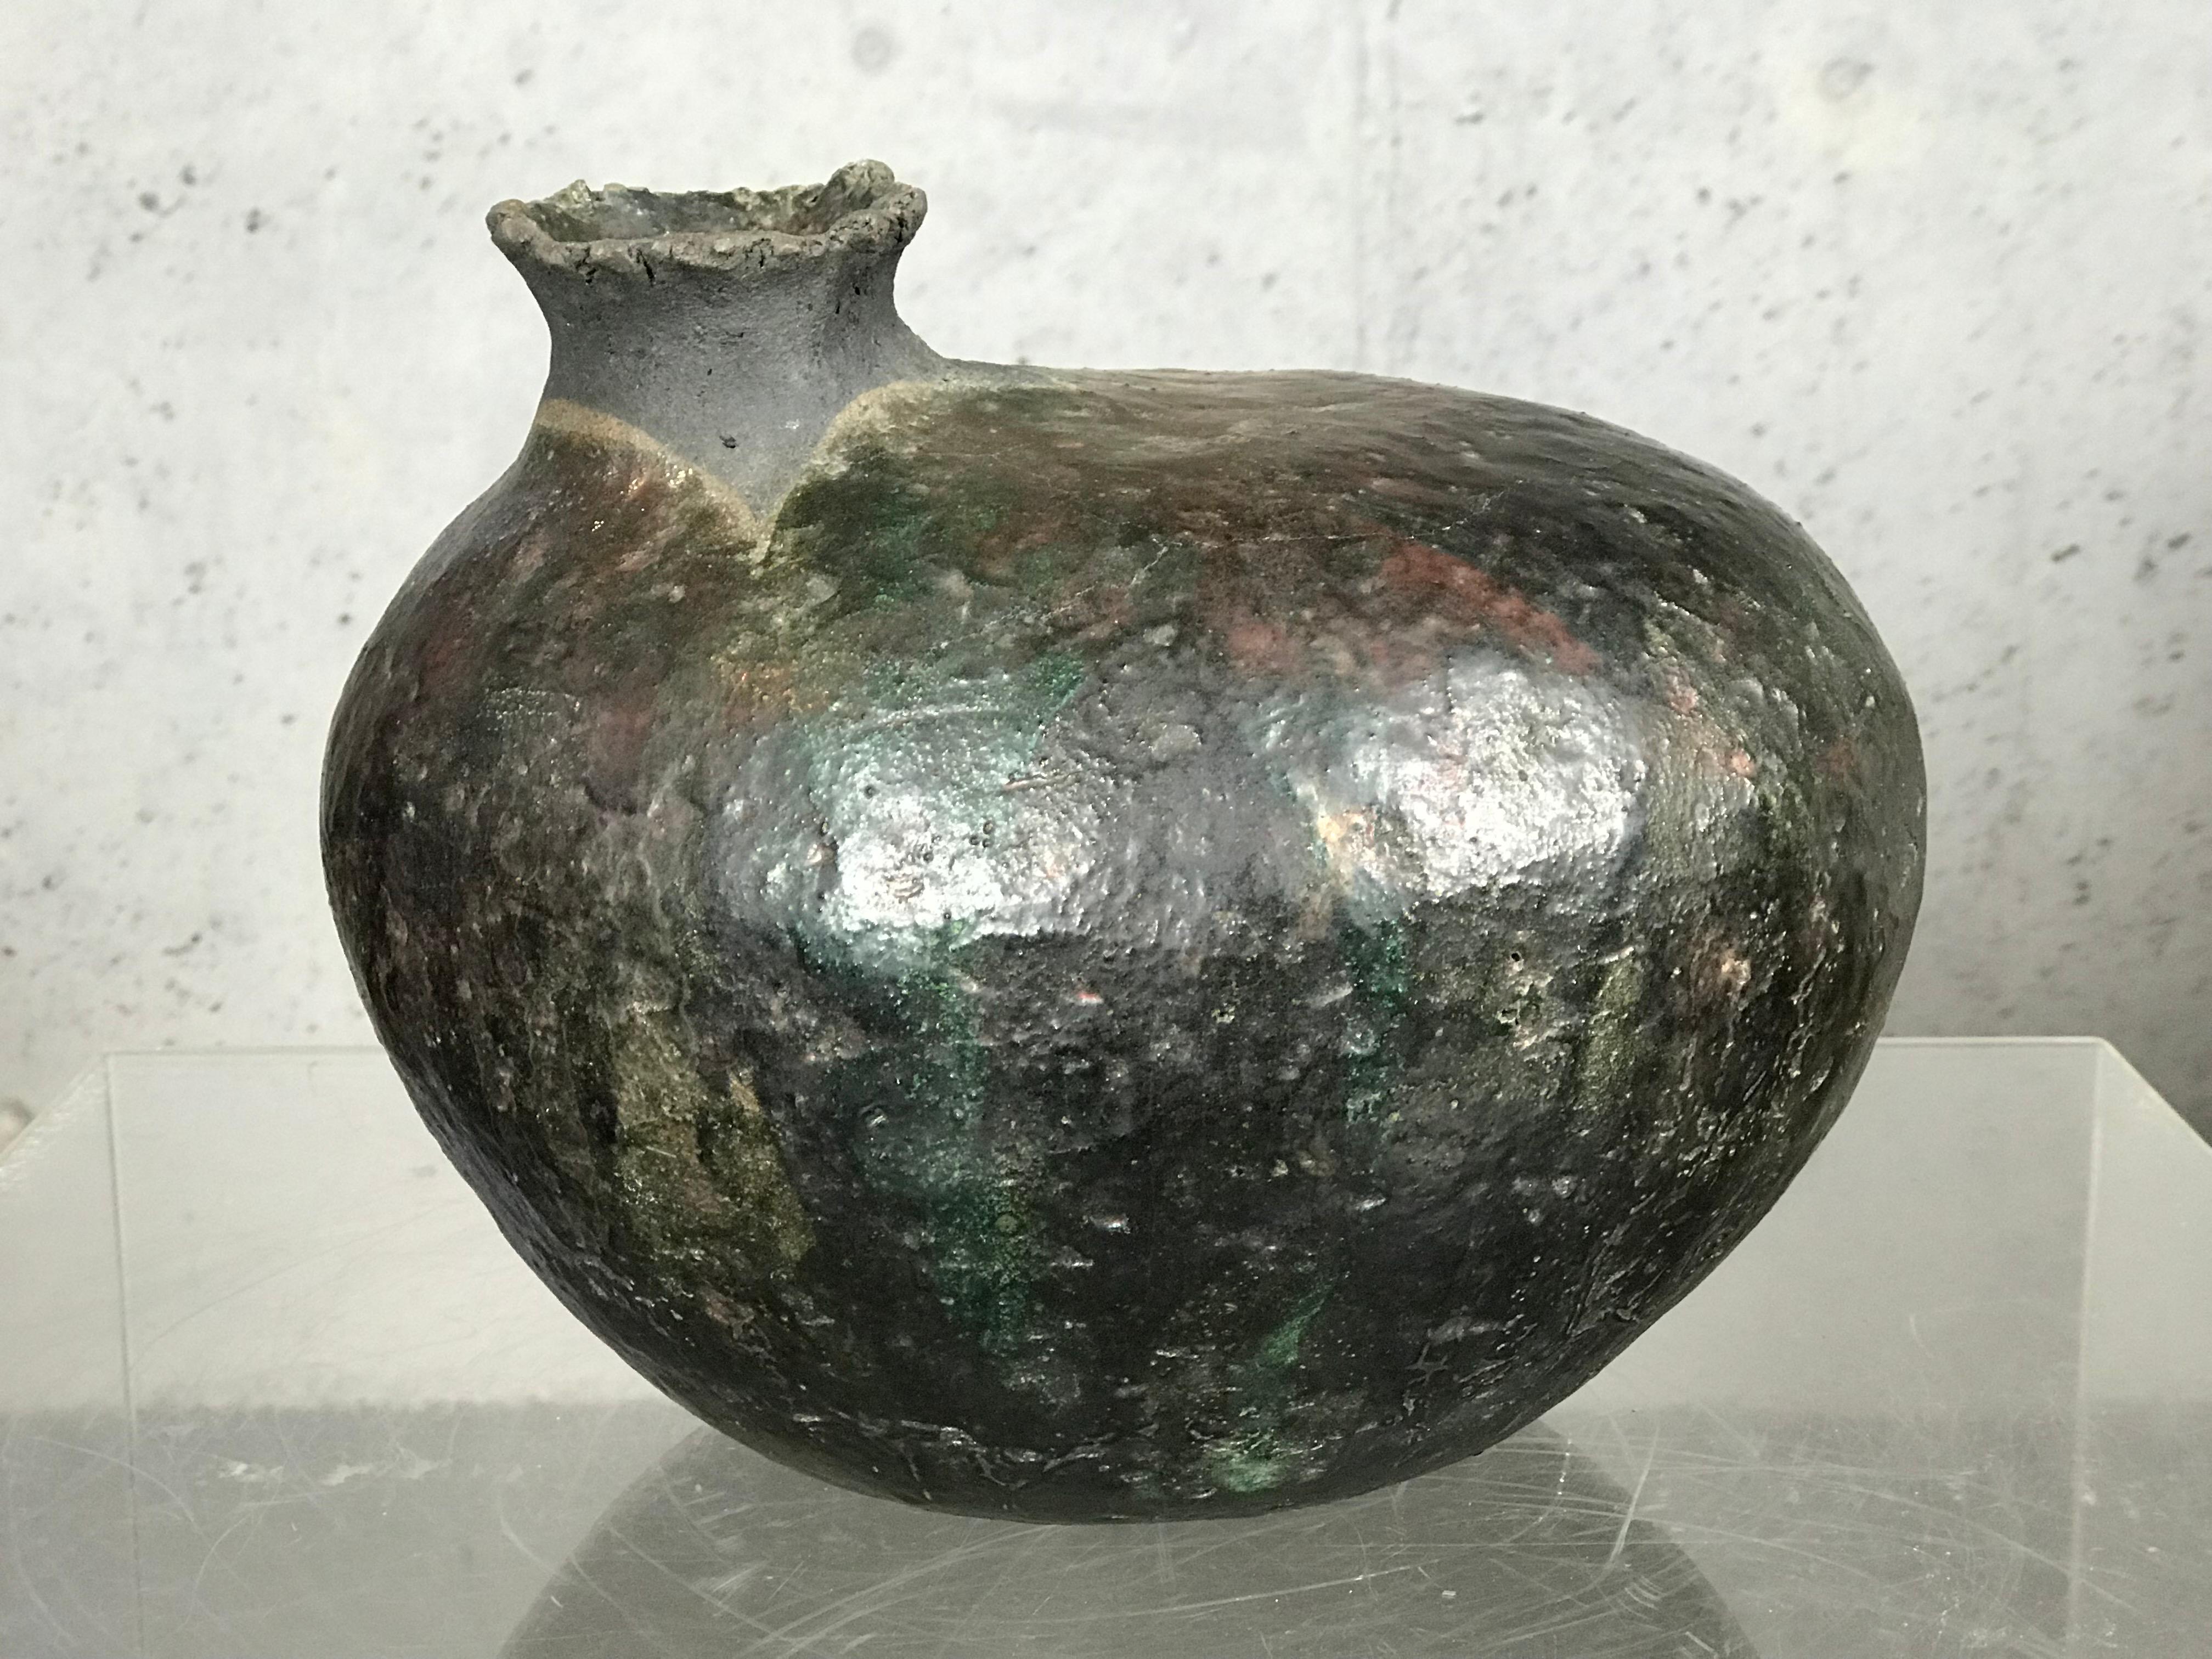 Excellent pottery vessel by the 'Grandma Moses' of Raku Pottery in the Southeast. Charlie Brown's ceramics can be found in many national modern artist publications. This vessel is signed C.B. 1972, and was bought from a residence that Charlie